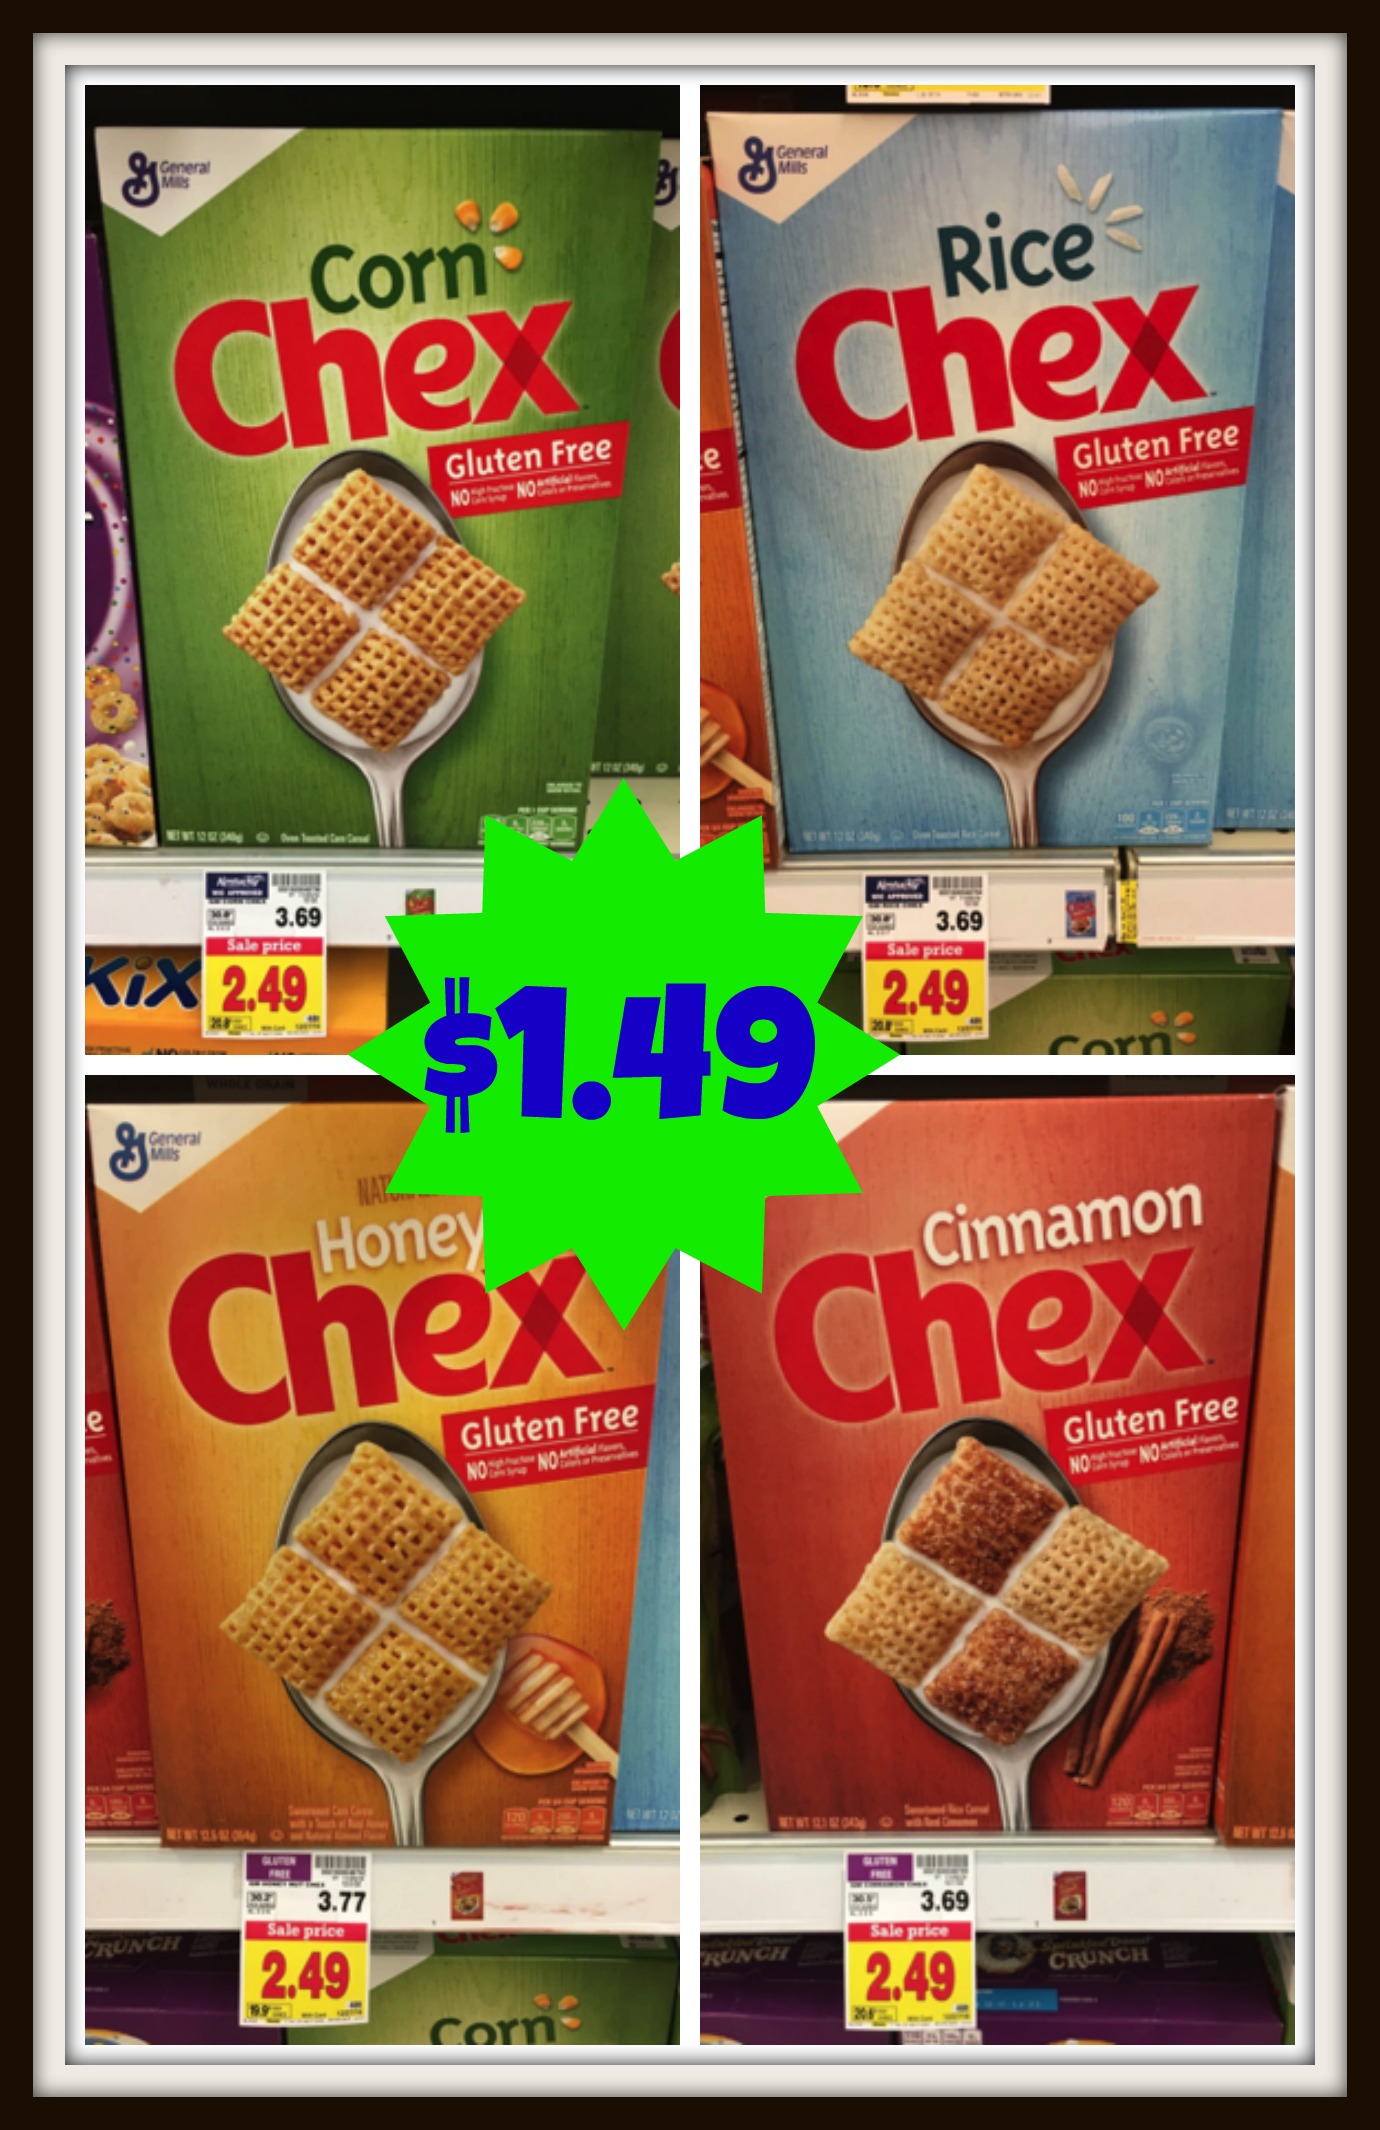 chex-mix-cereal-image